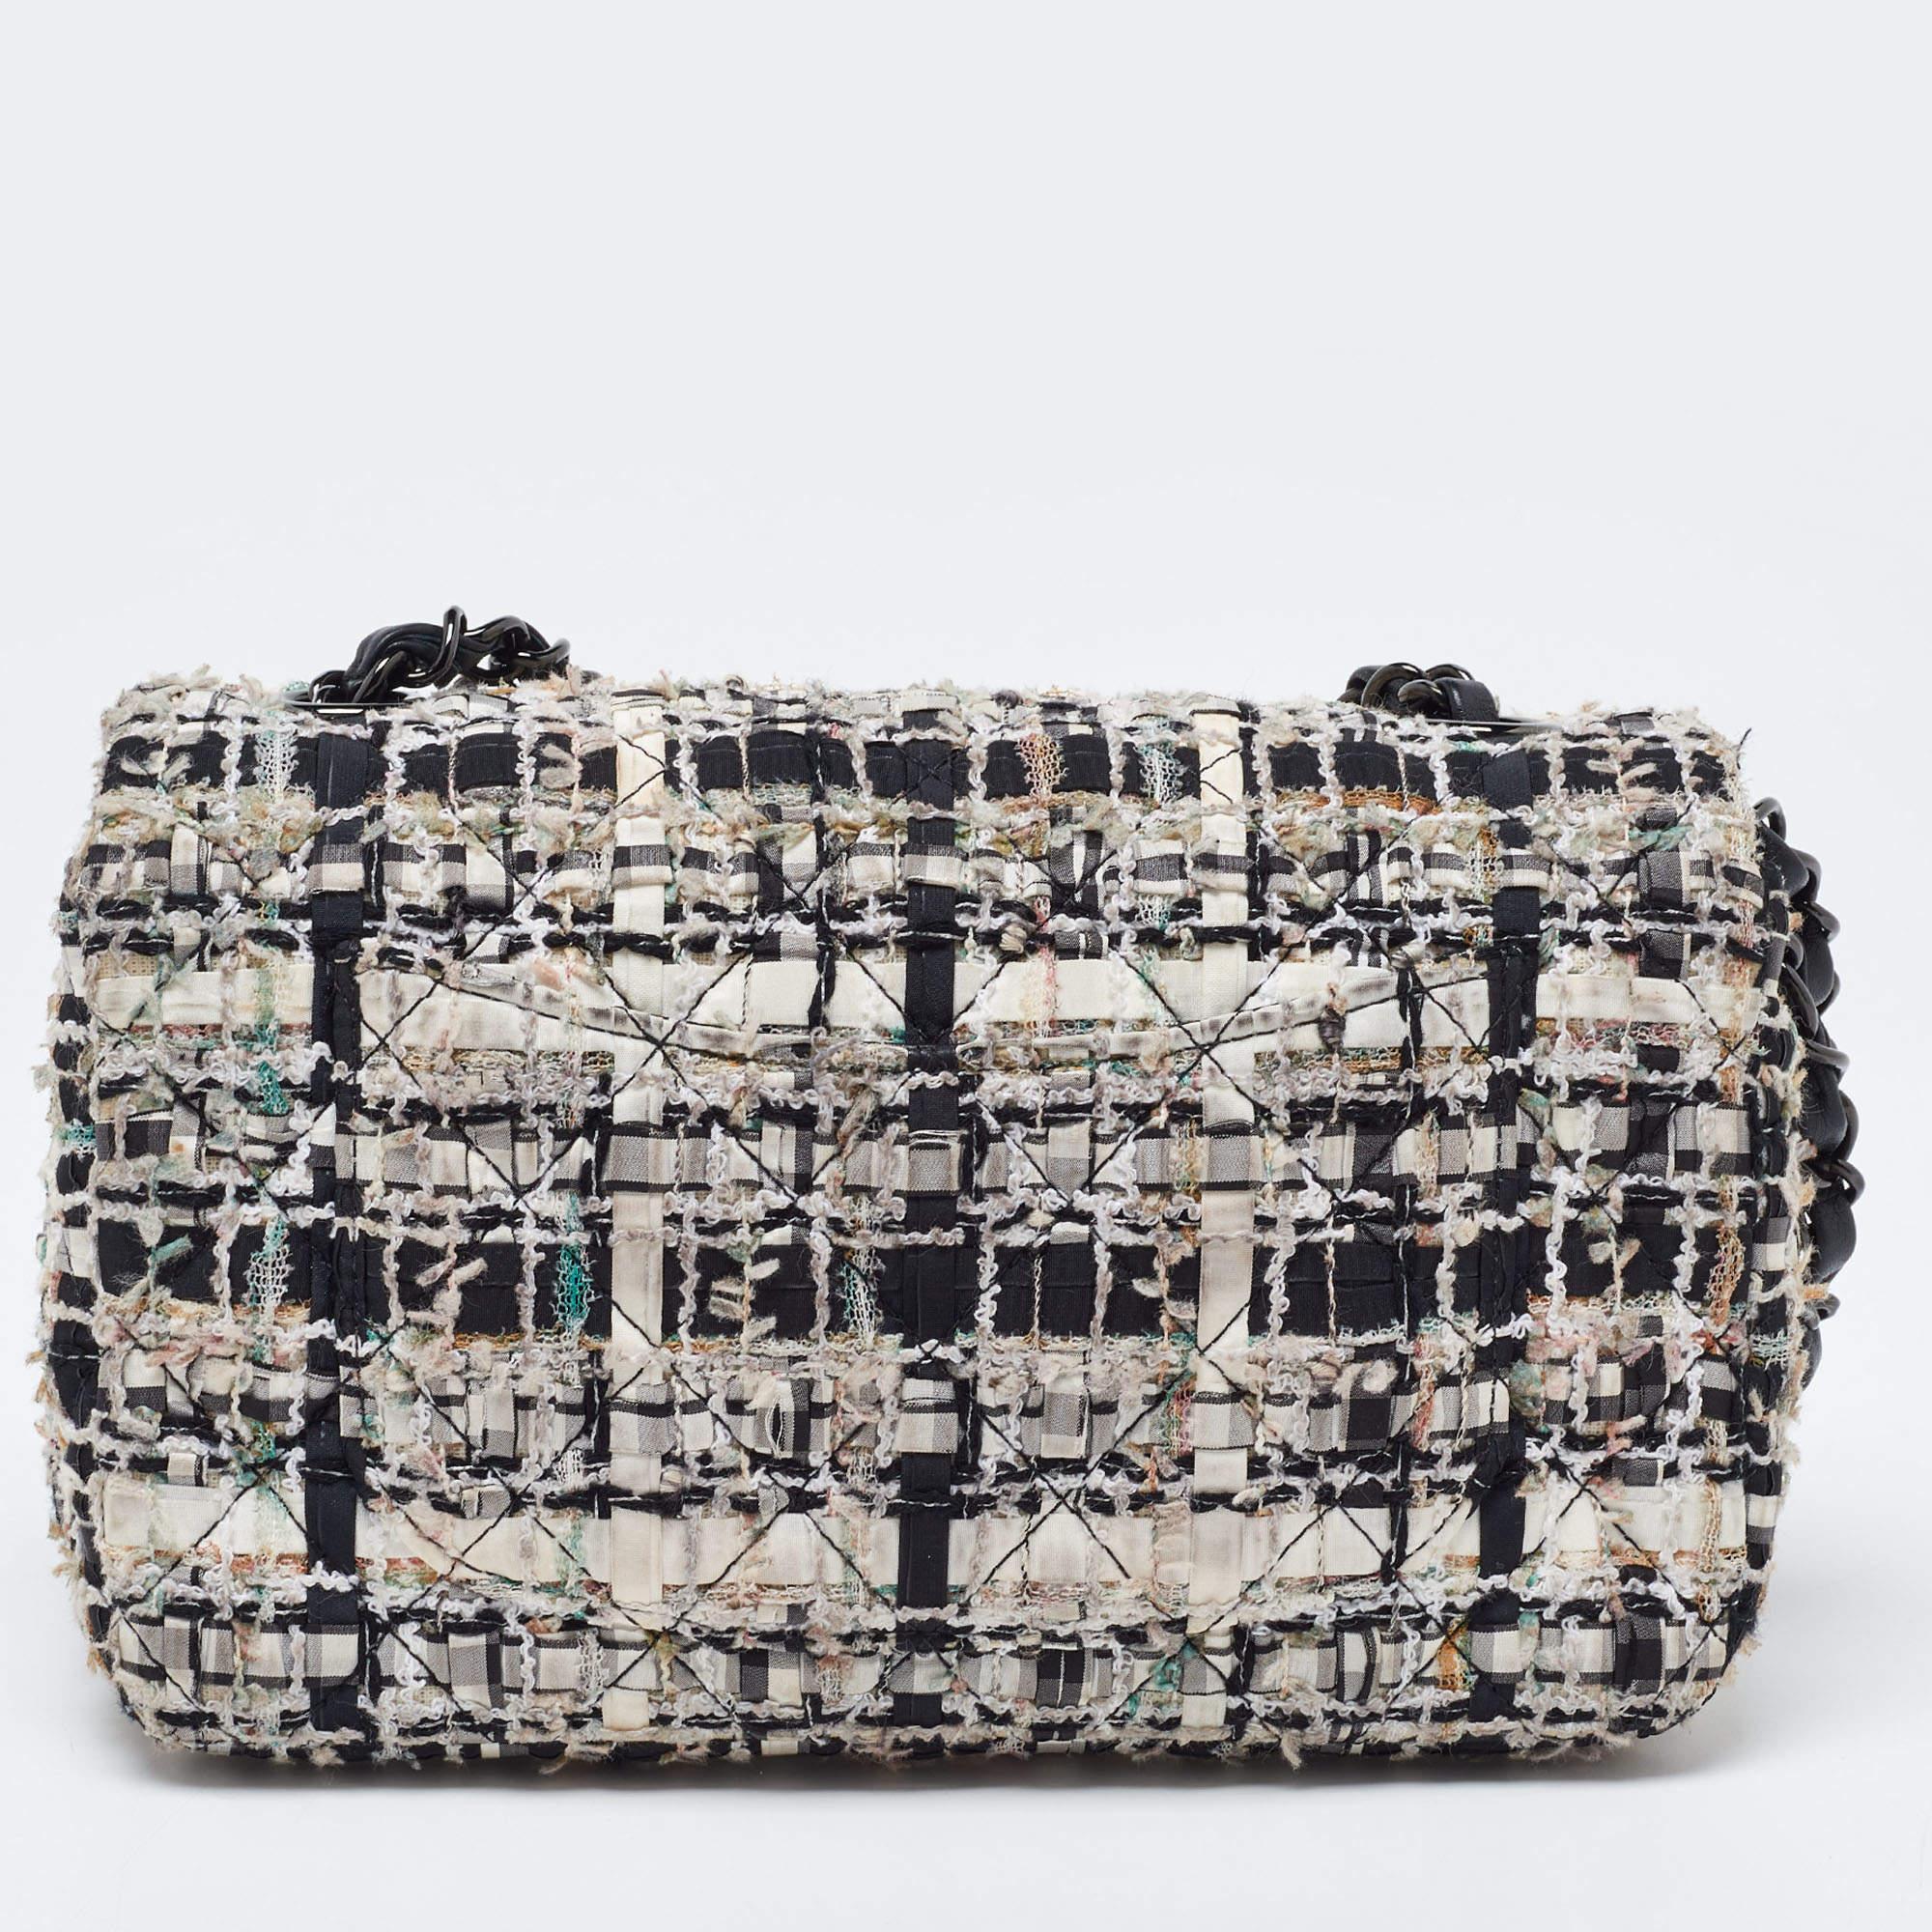 Chanel's flap bags are timeless and you need to add one to your handbag collection right away. Exquisitely crafted from tweed, it bears their iconic CC turn-lock on the flap. The piece has a lovely chain link just so you can easily parade it. This